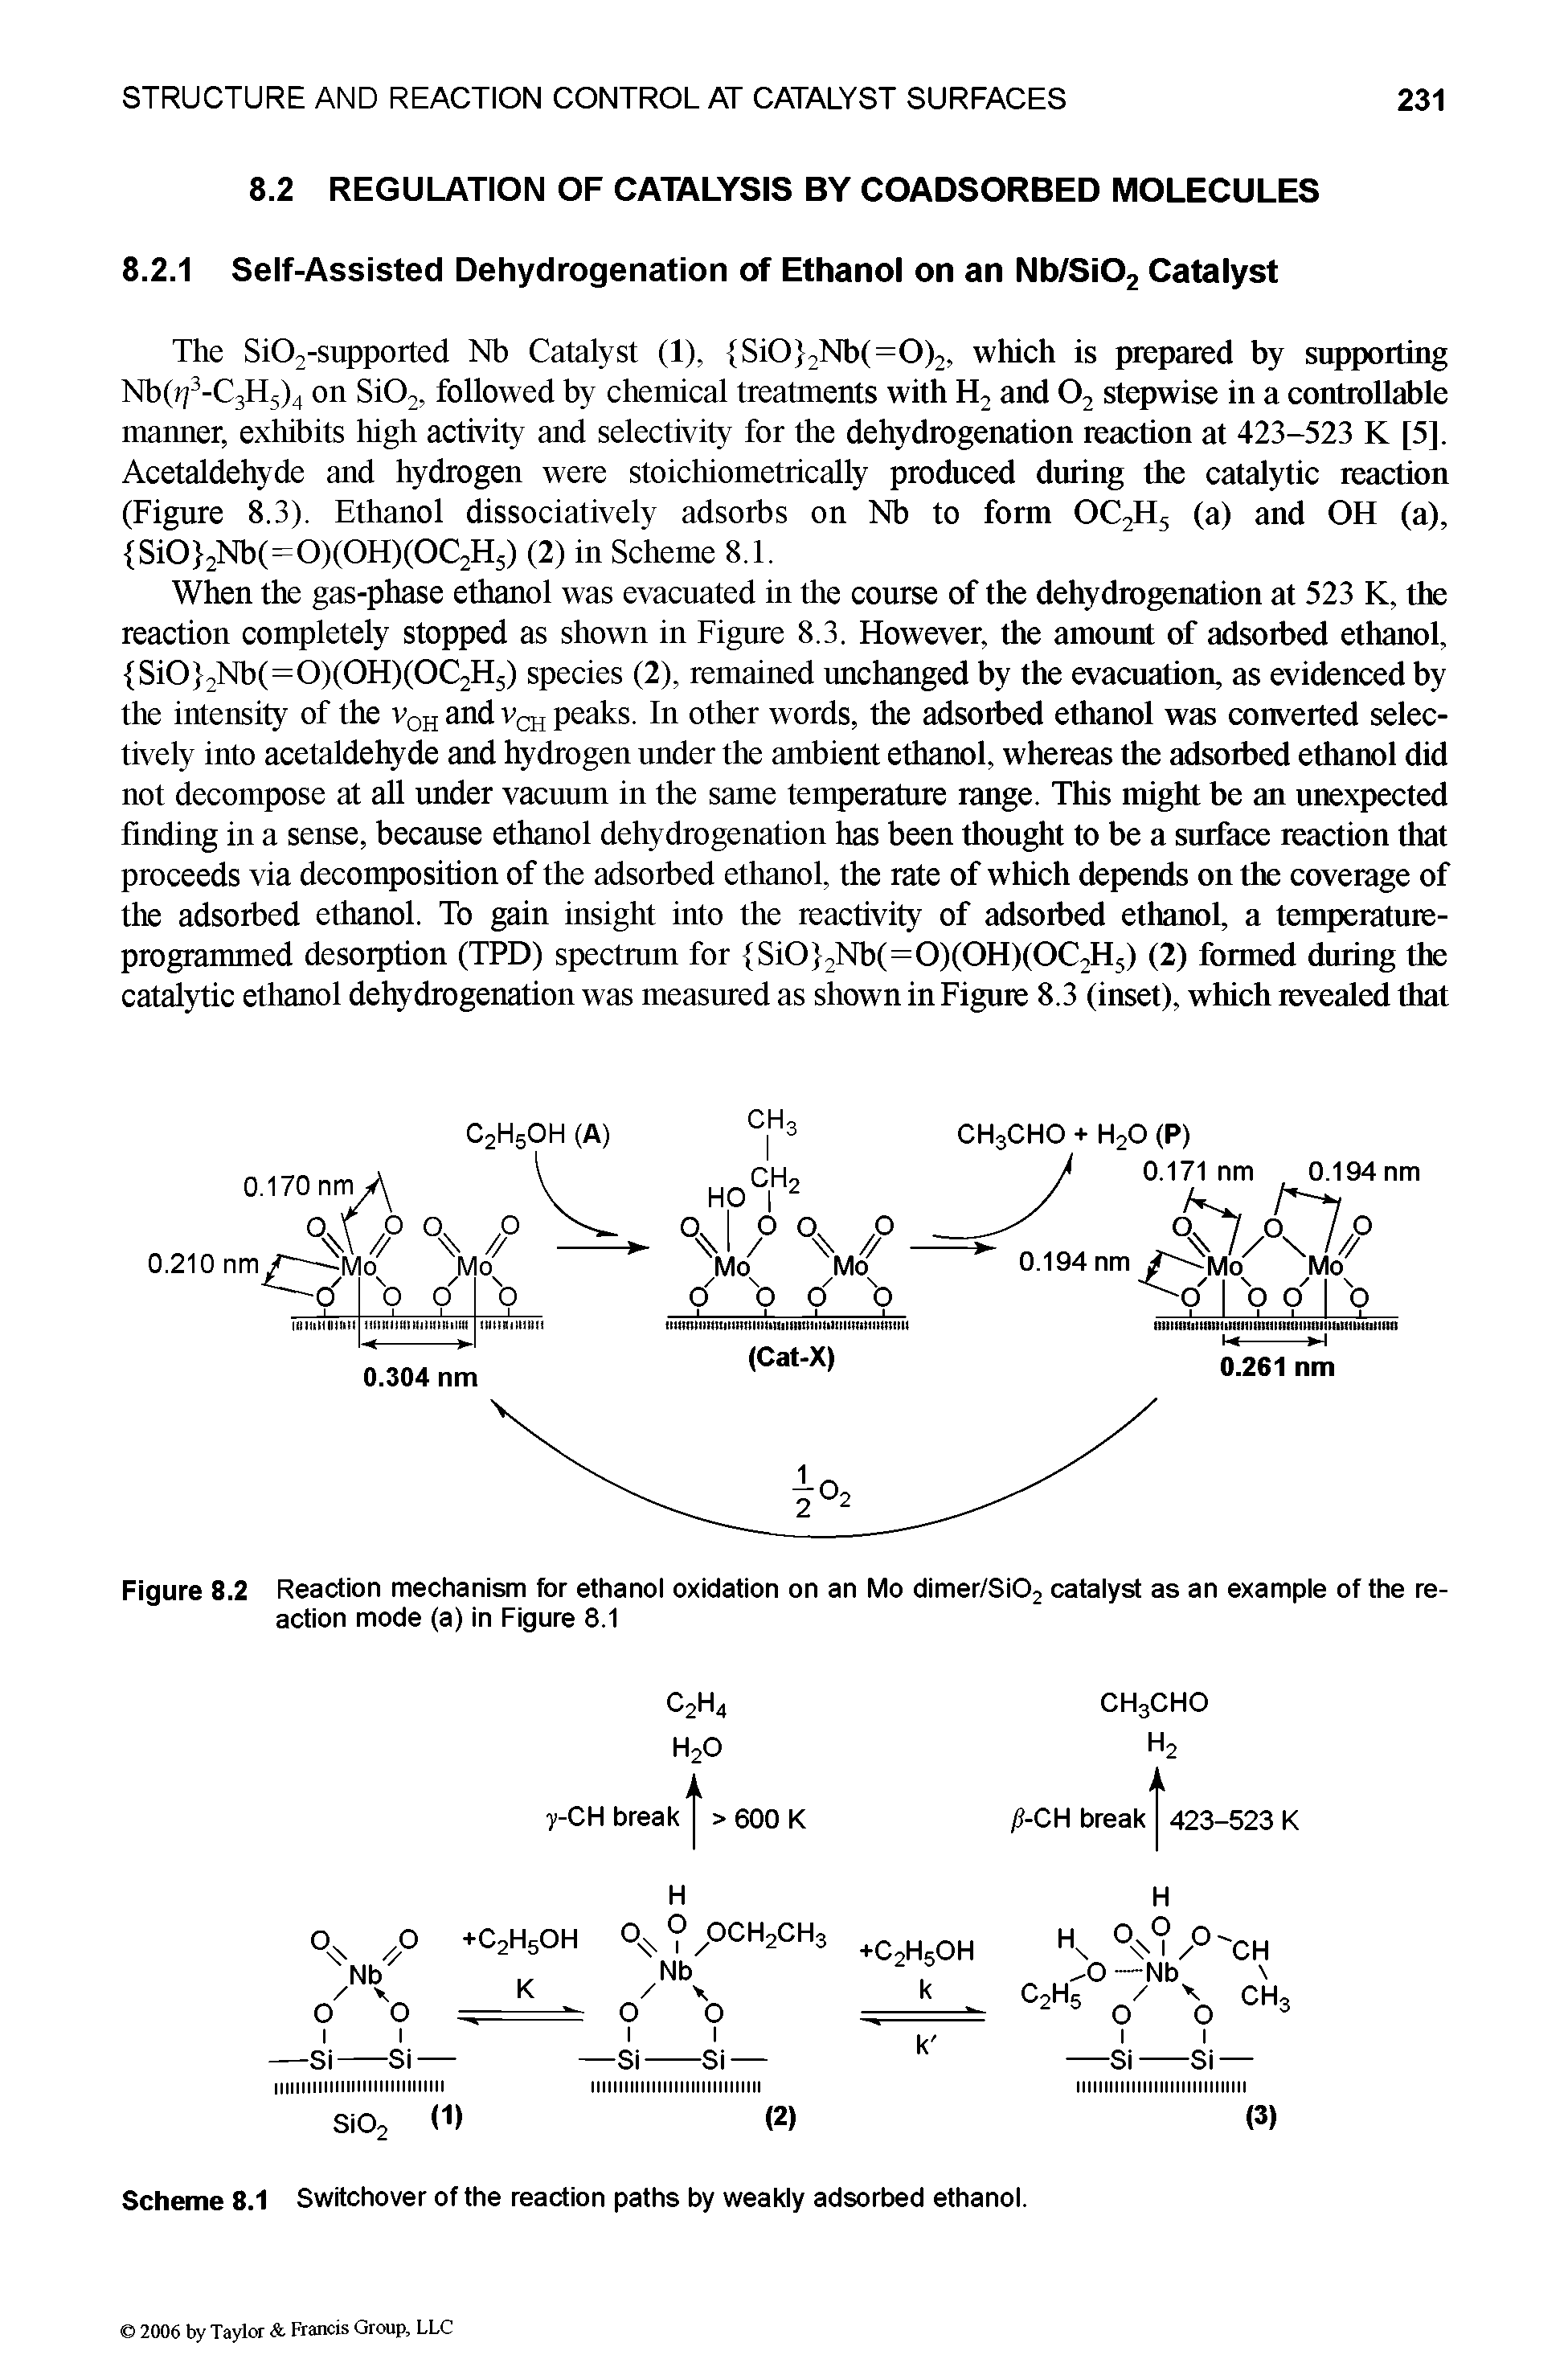 Figure 8.2 Reaction mechanism for ethanol oxidation on an Mo dimer/Si02 catalyst as an example of the reaction mode (a) in Figure 8.1...